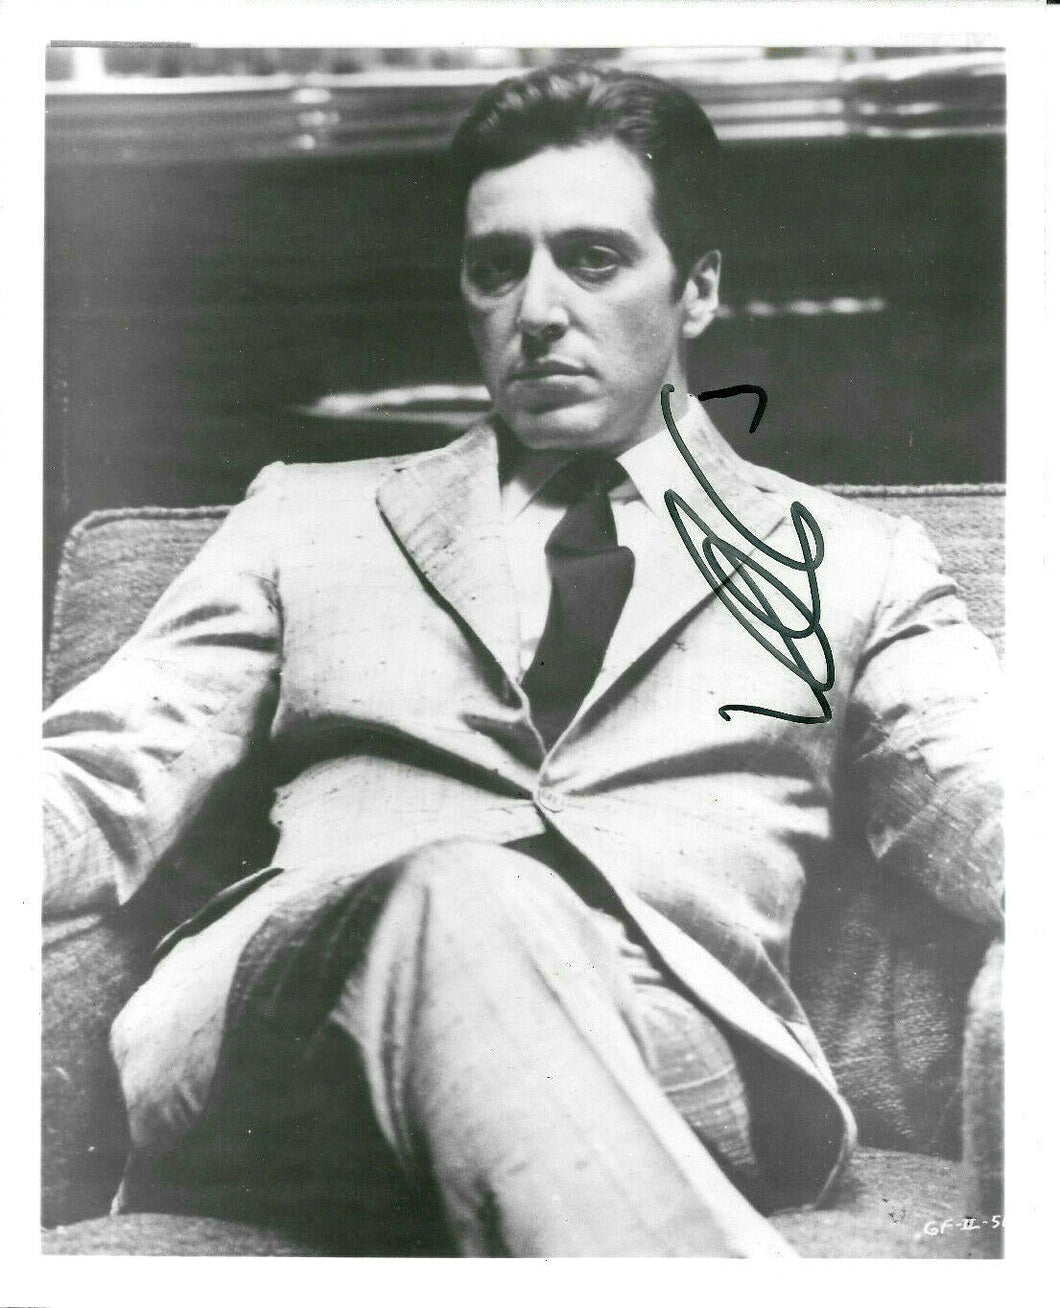 AL PACINO SCARFACE HAND SIGNED AUTOGRAPHED 8X10 GLOSSY PHOTO WITH COA